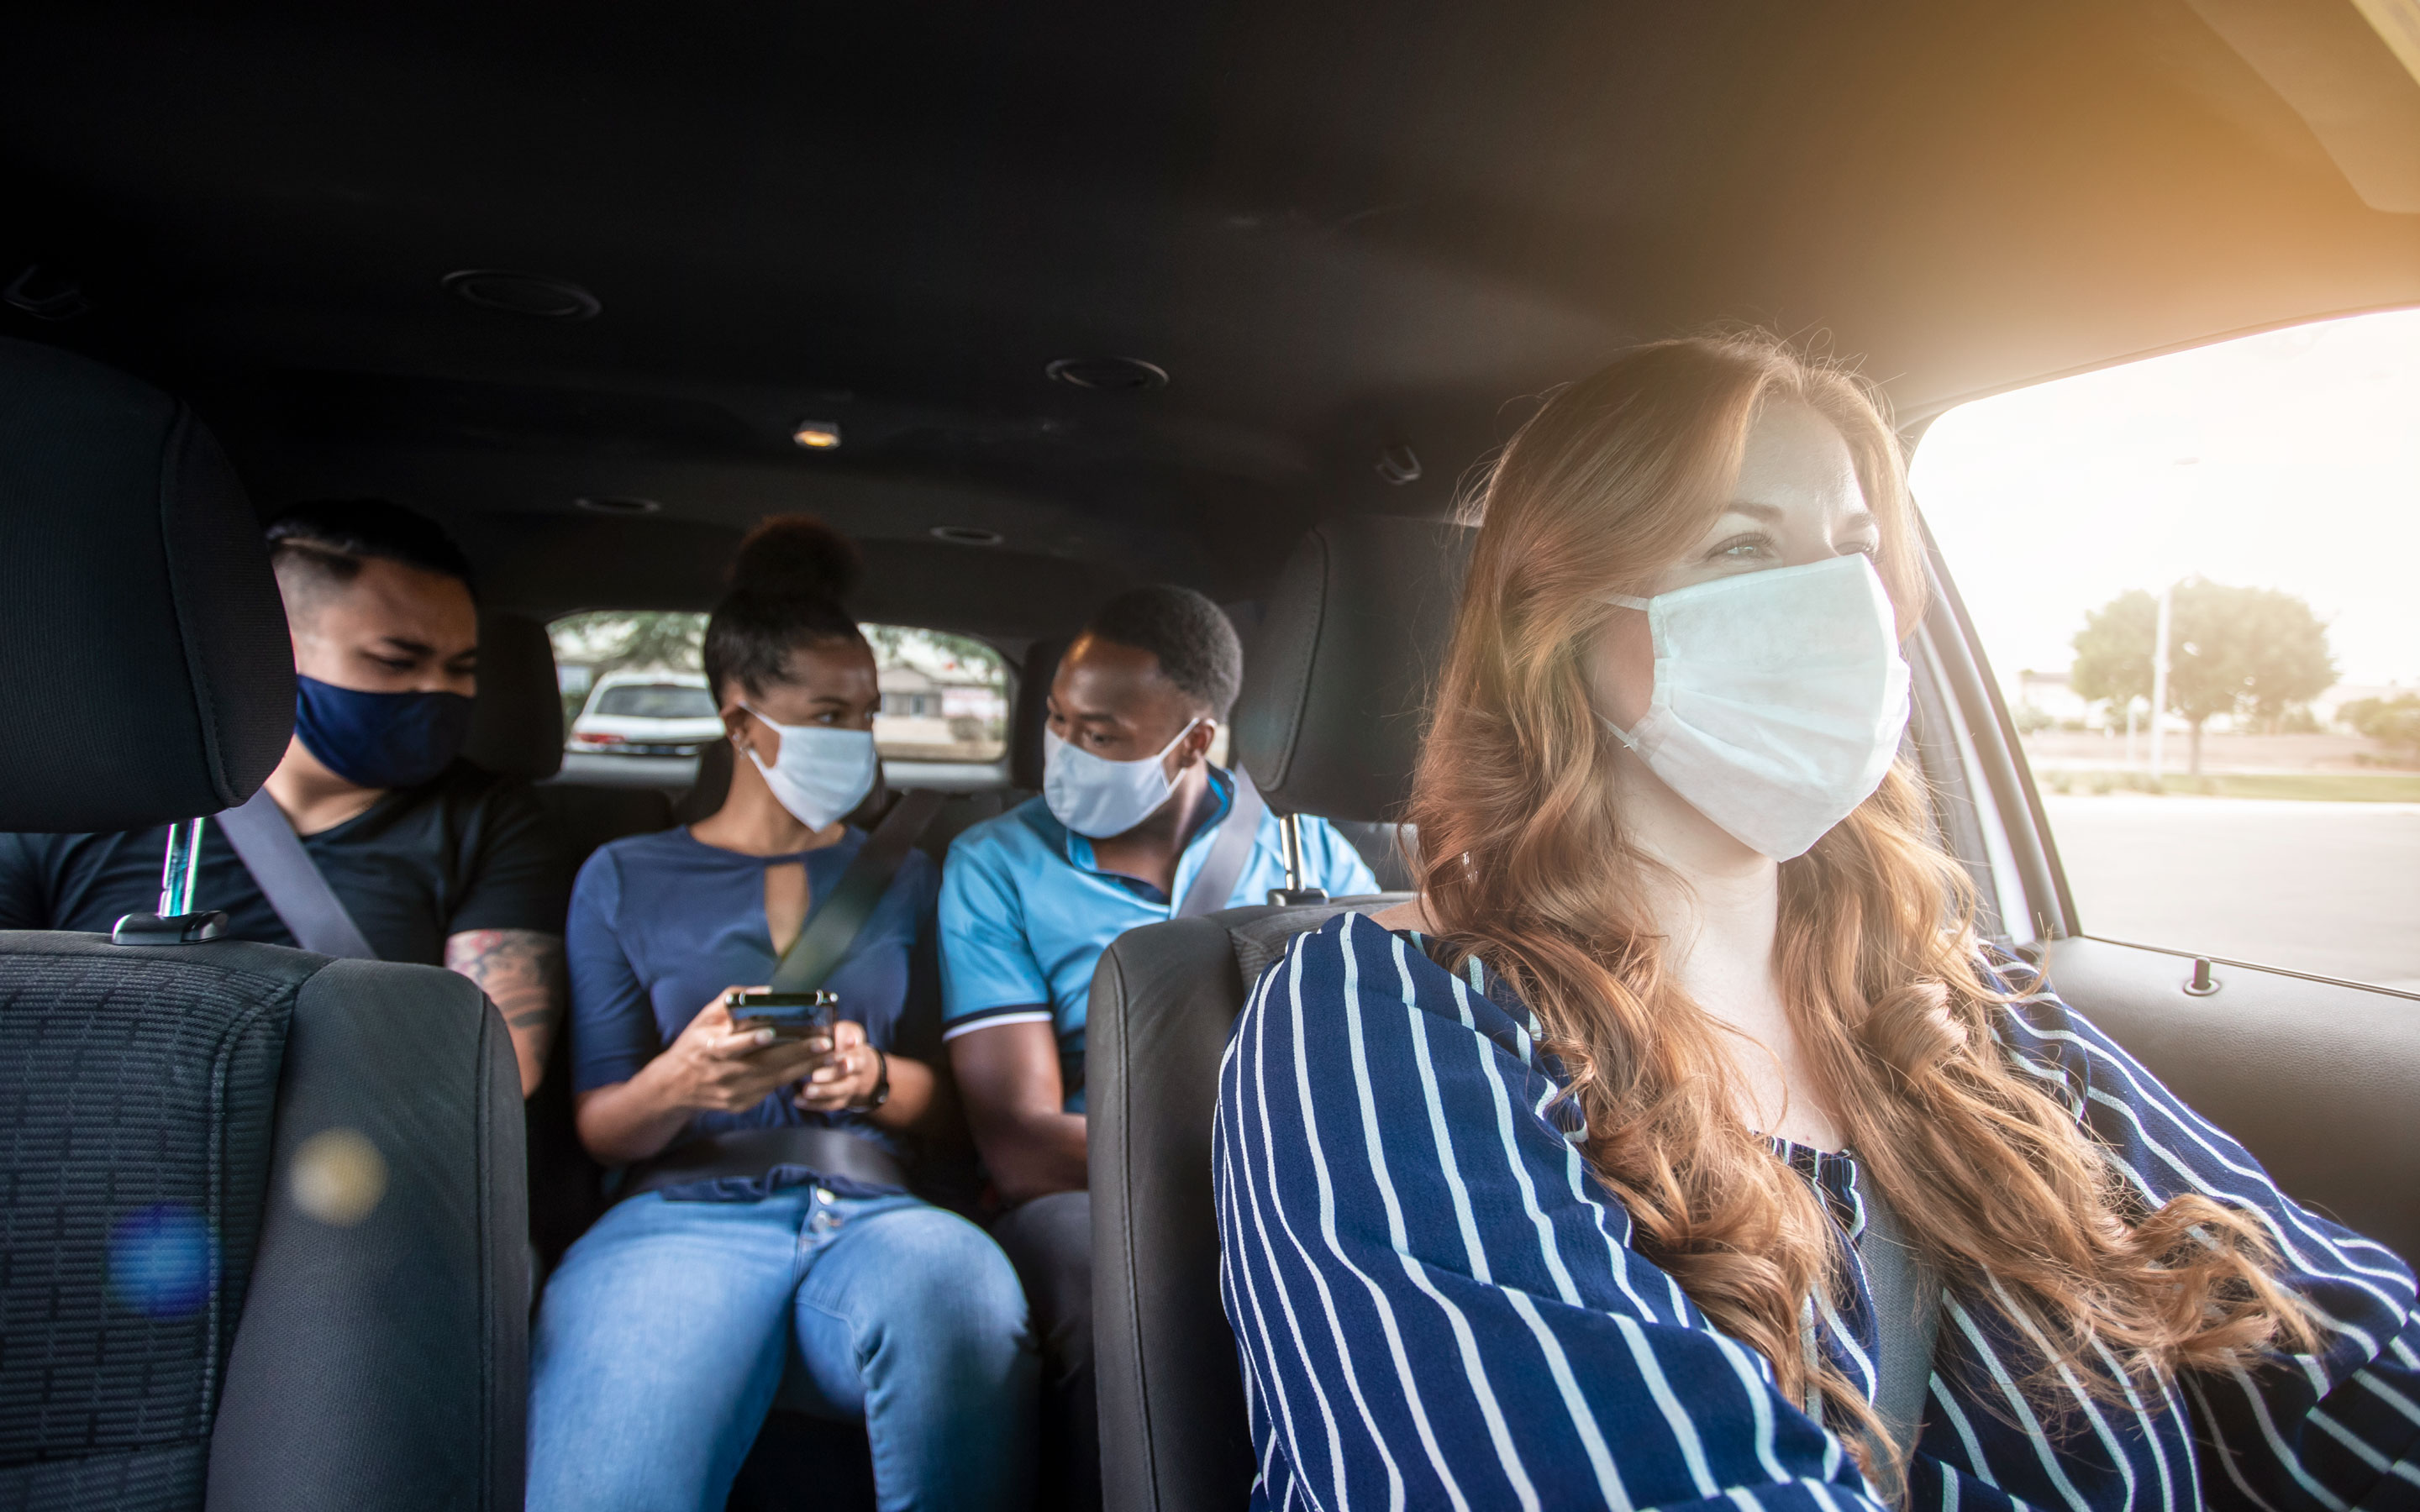 Capgemini_How-consumers-see-the-car-as-a-safe-space